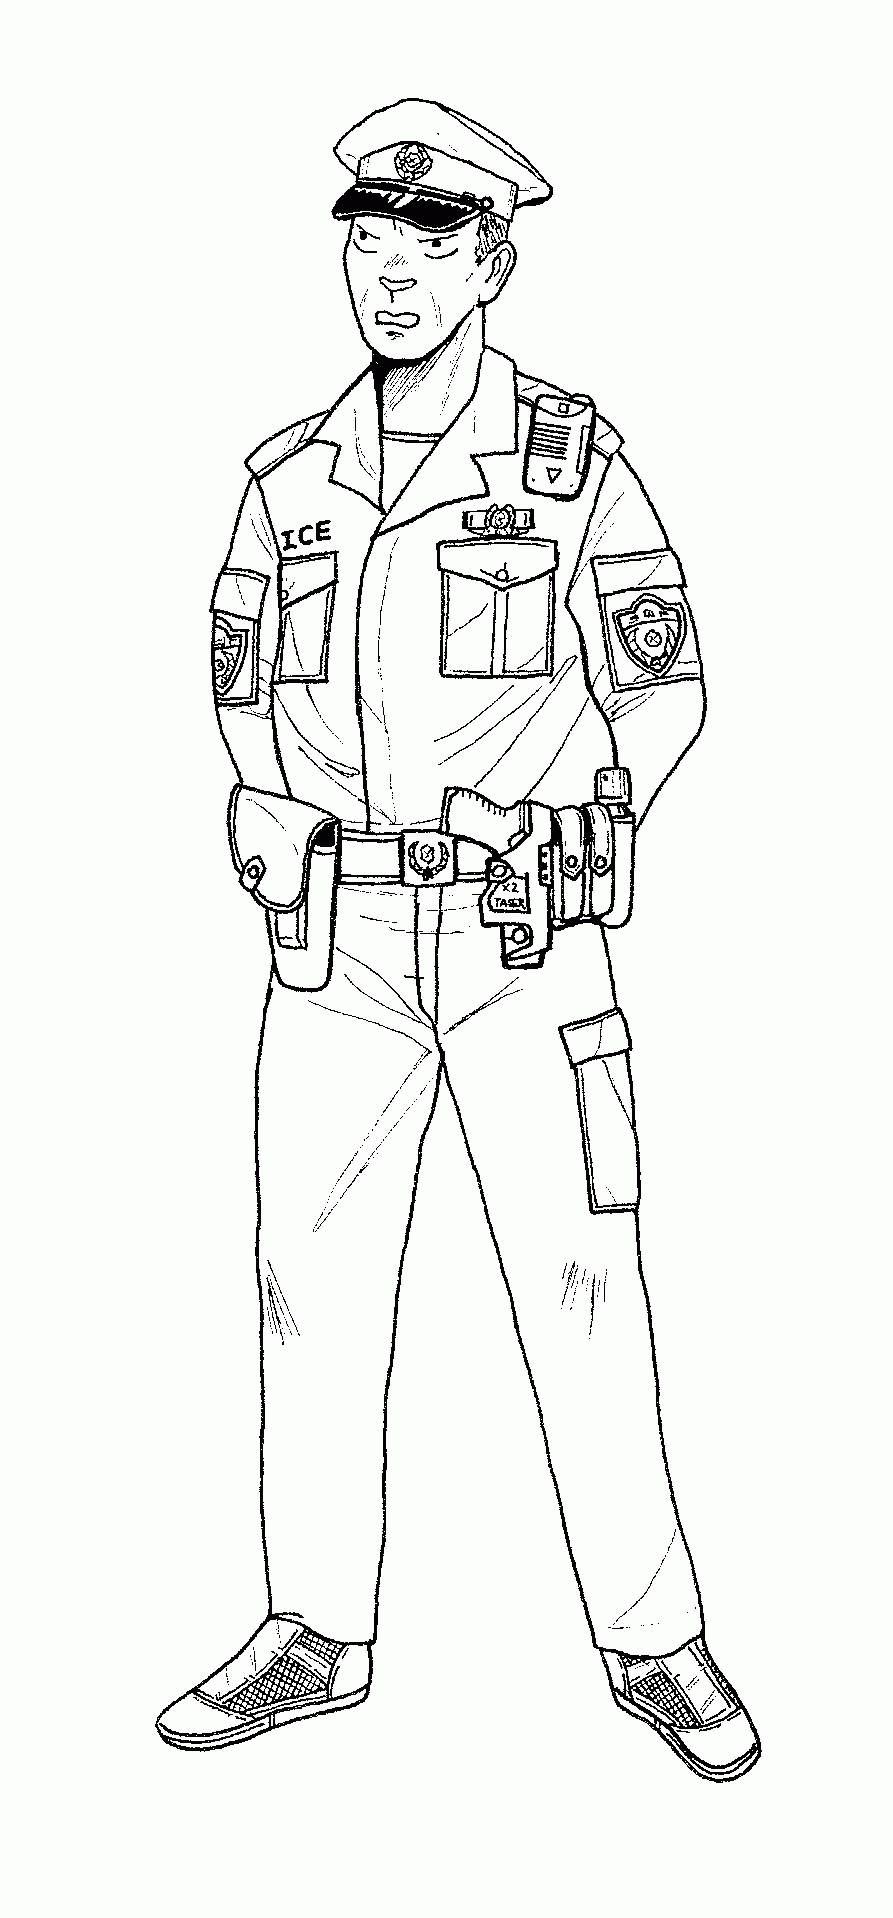 POLICE MAN COLORING PAGE   Coloring Home